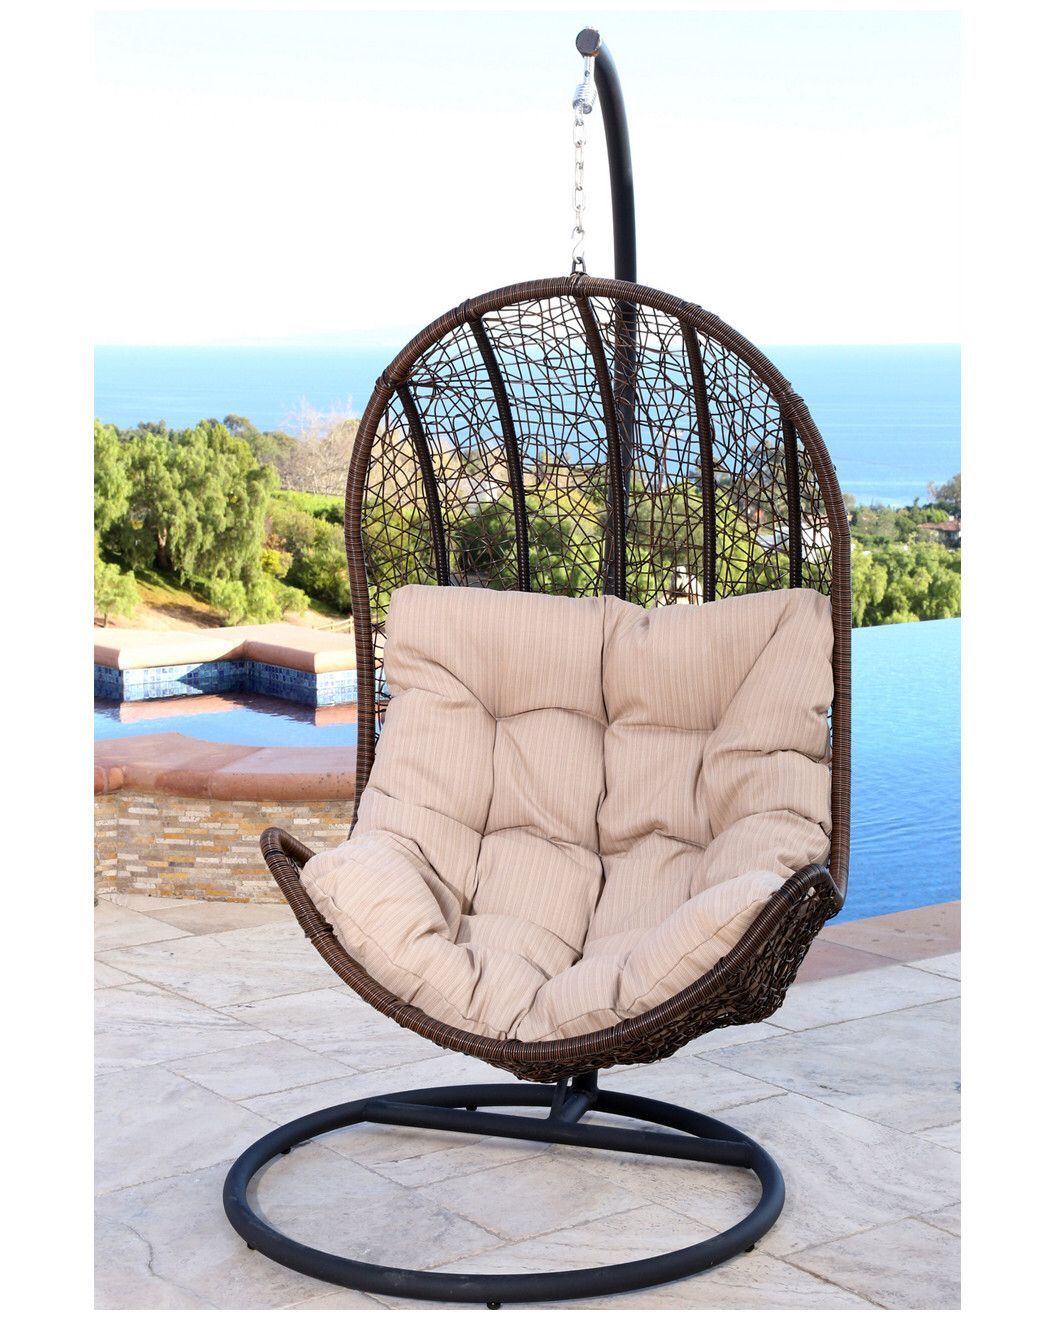 Hydraulics reccomend Swinging wicker chair